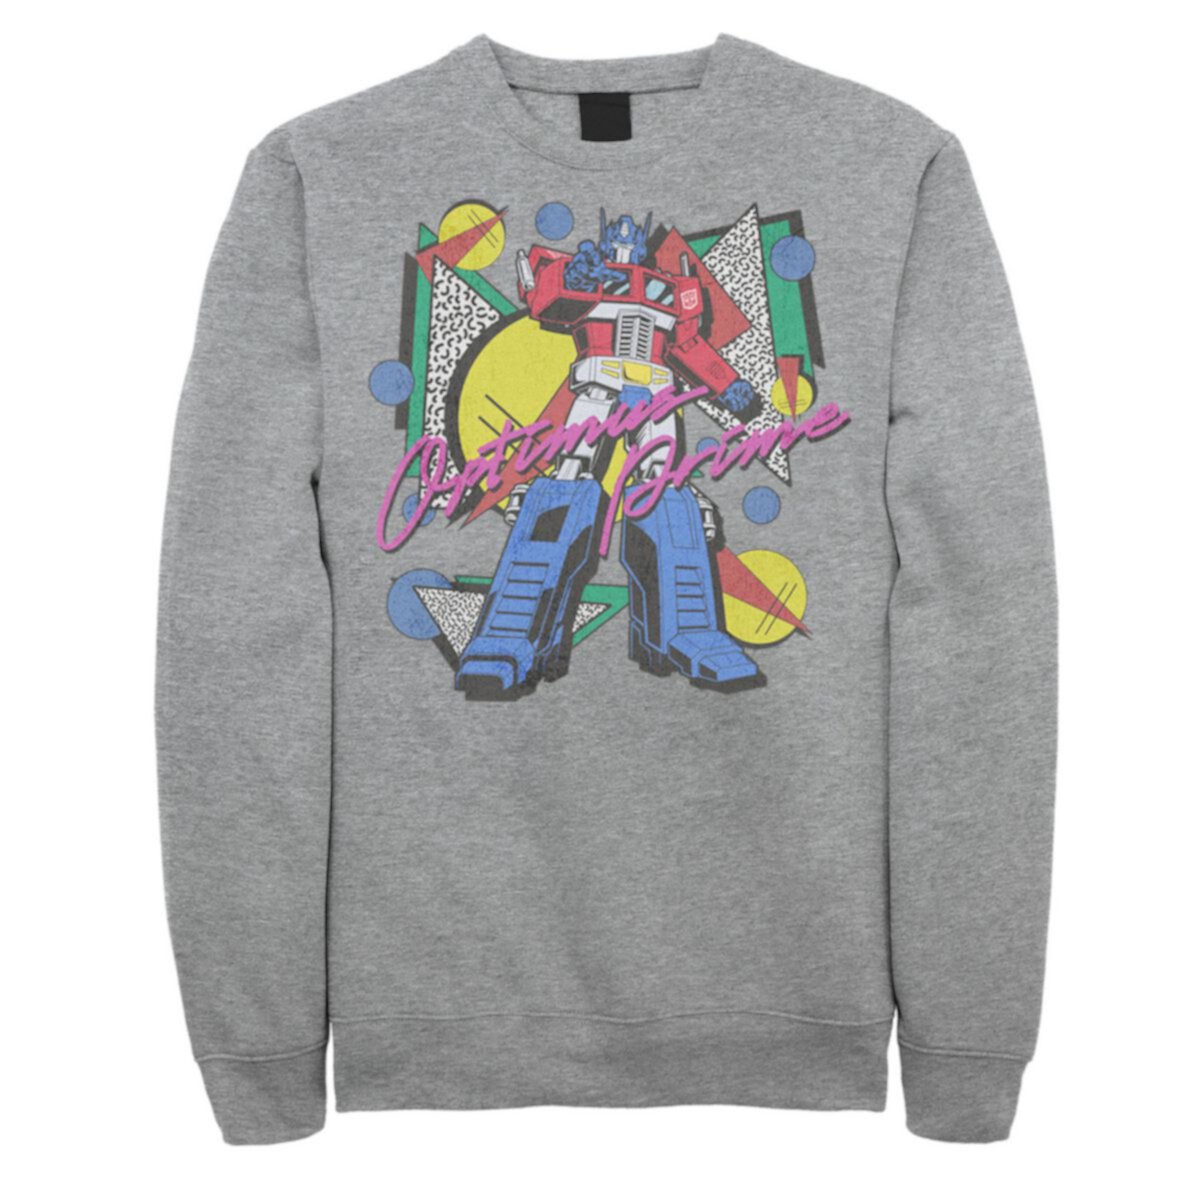 Men's Transformers Optimus Prime 80's Style Background Graphic Fleece Licensed Character